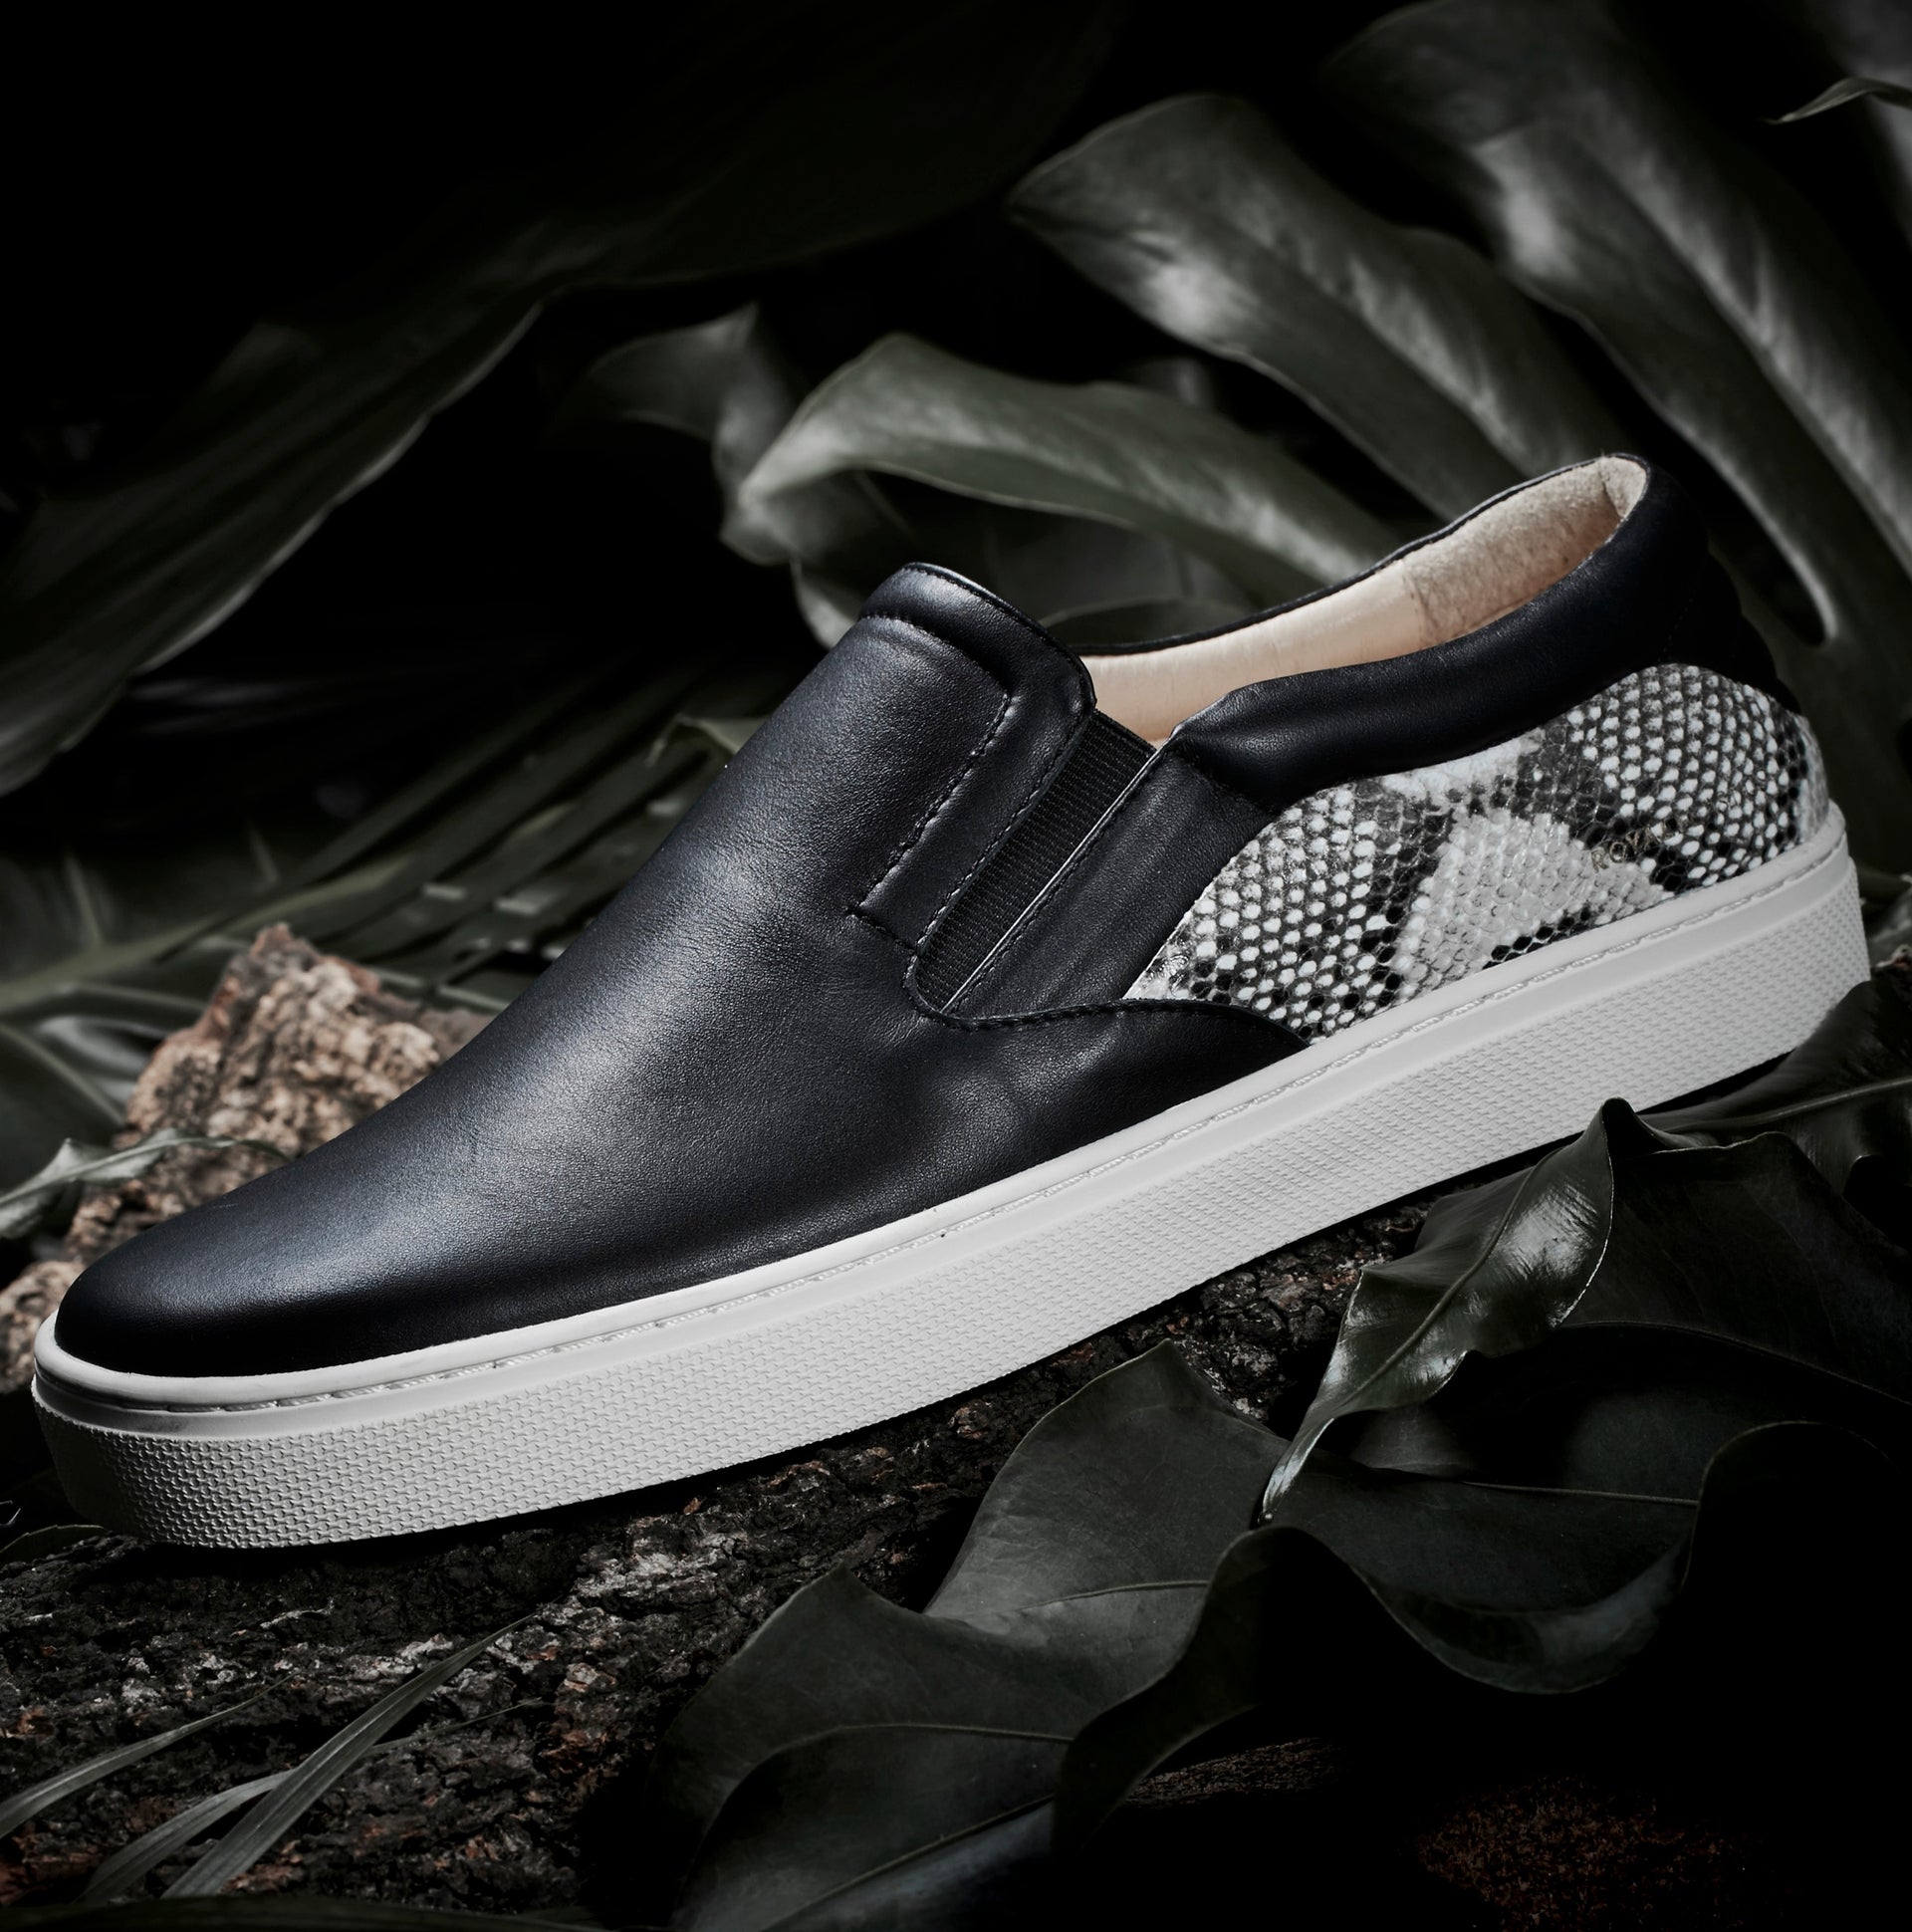 KETELLA: Wild Laceless Series features Animal Print and Alpine Wool